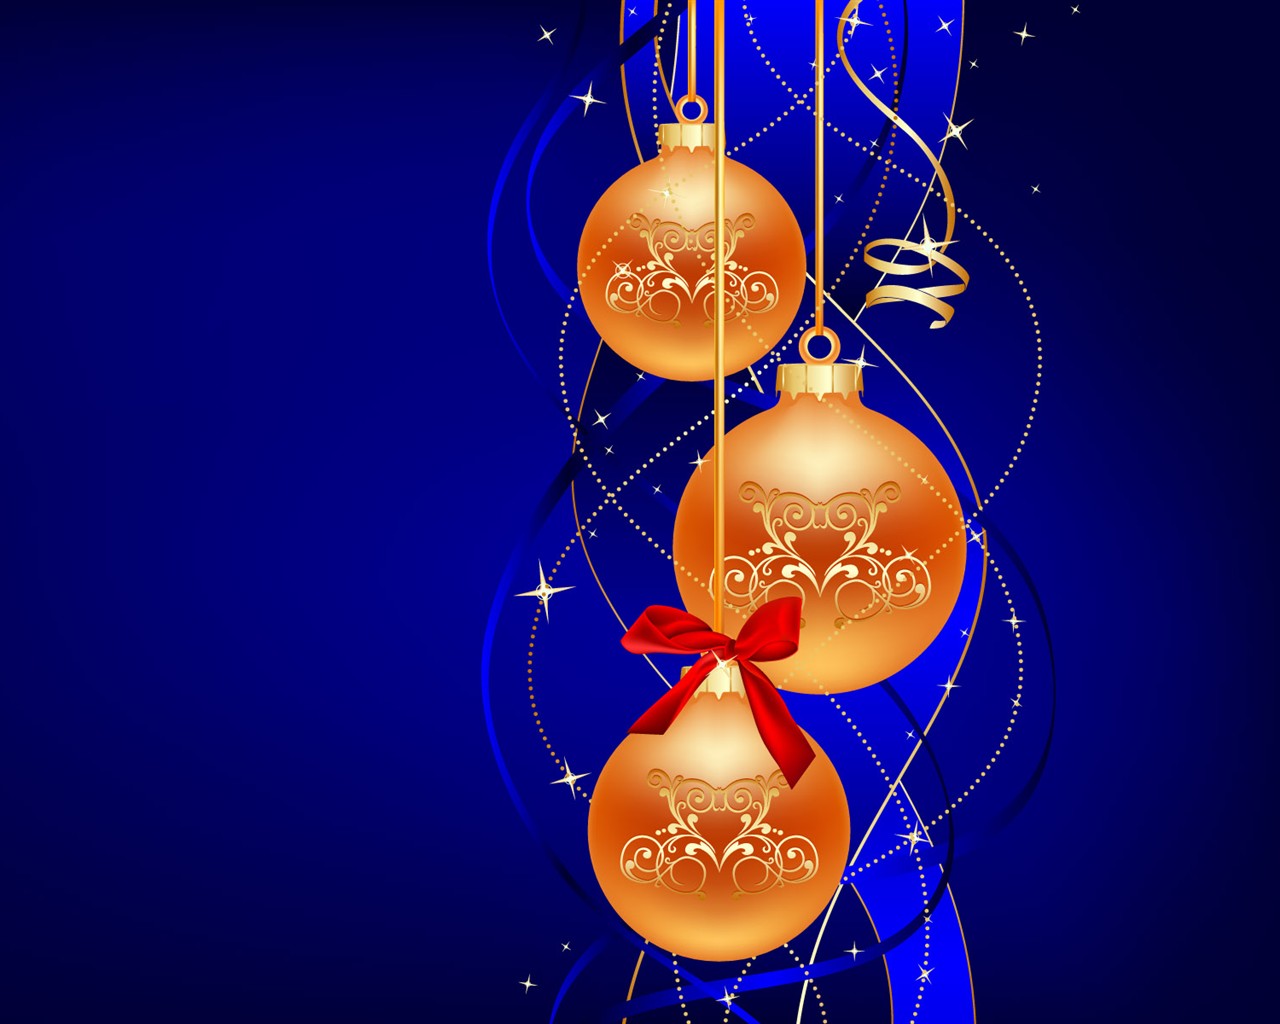 Exquisite Christmas Theme HD Wallpapers #26 - 1280x1024